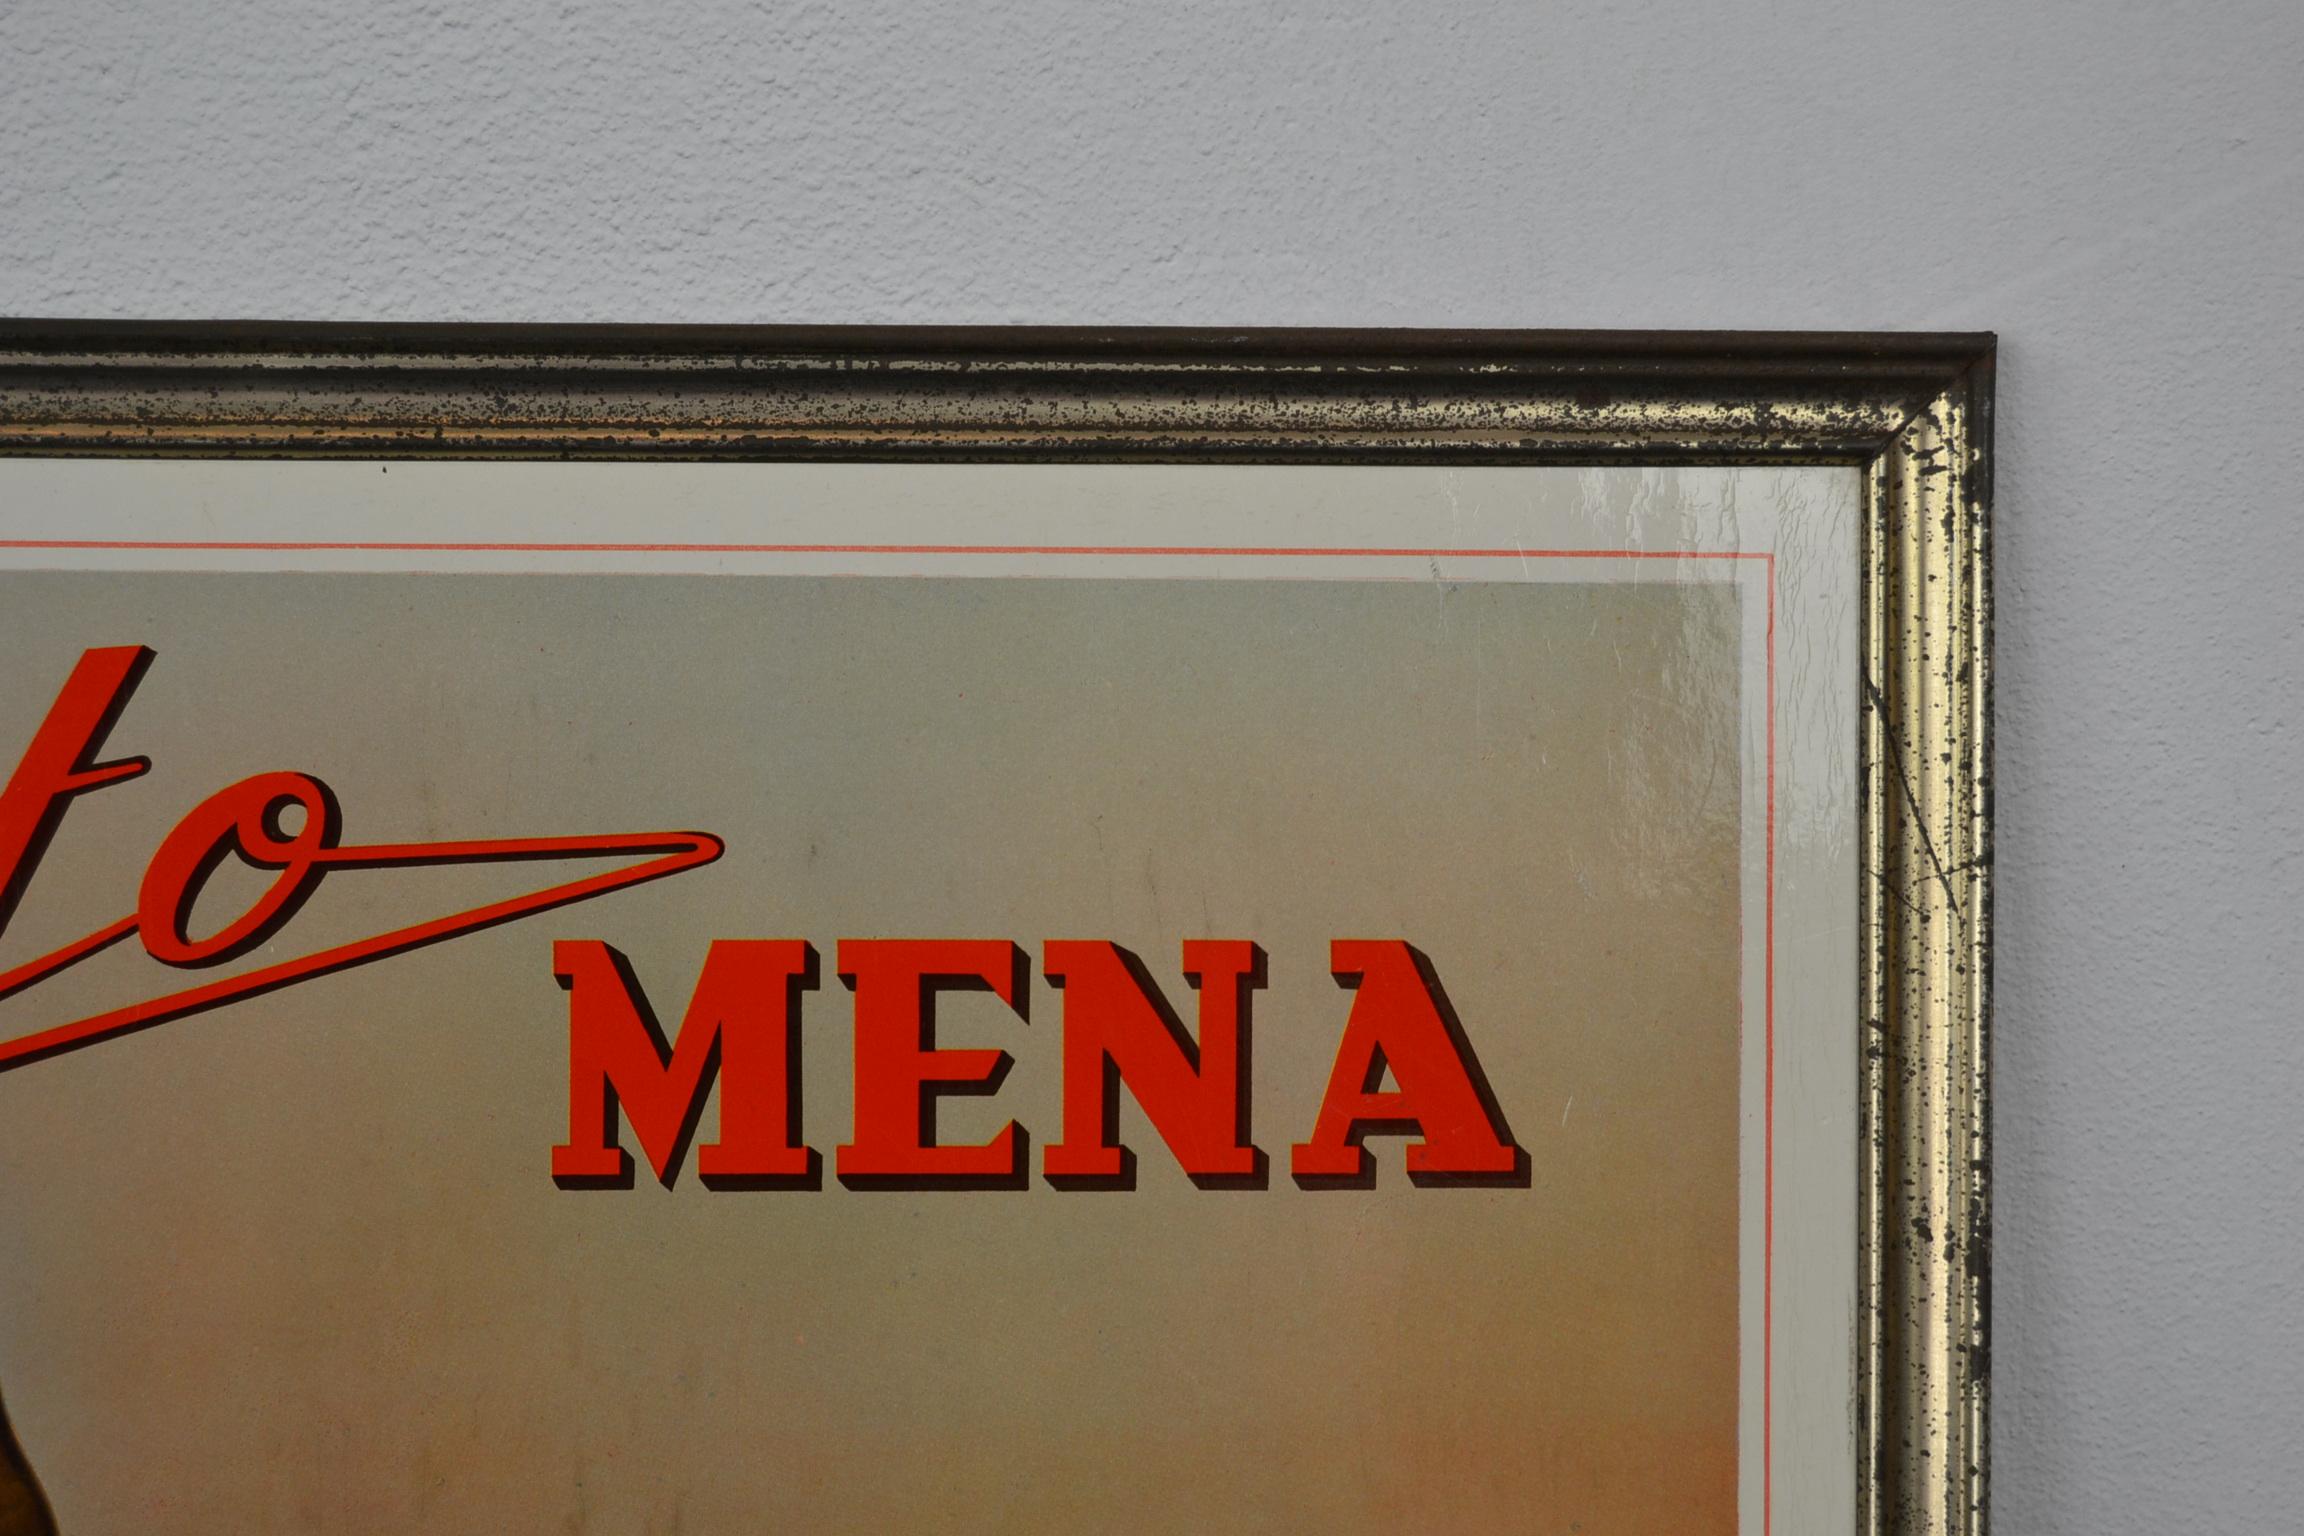 Card Game Wall Decoration Sign, 1961 In Good Condition For Sale In Antwerp, BE